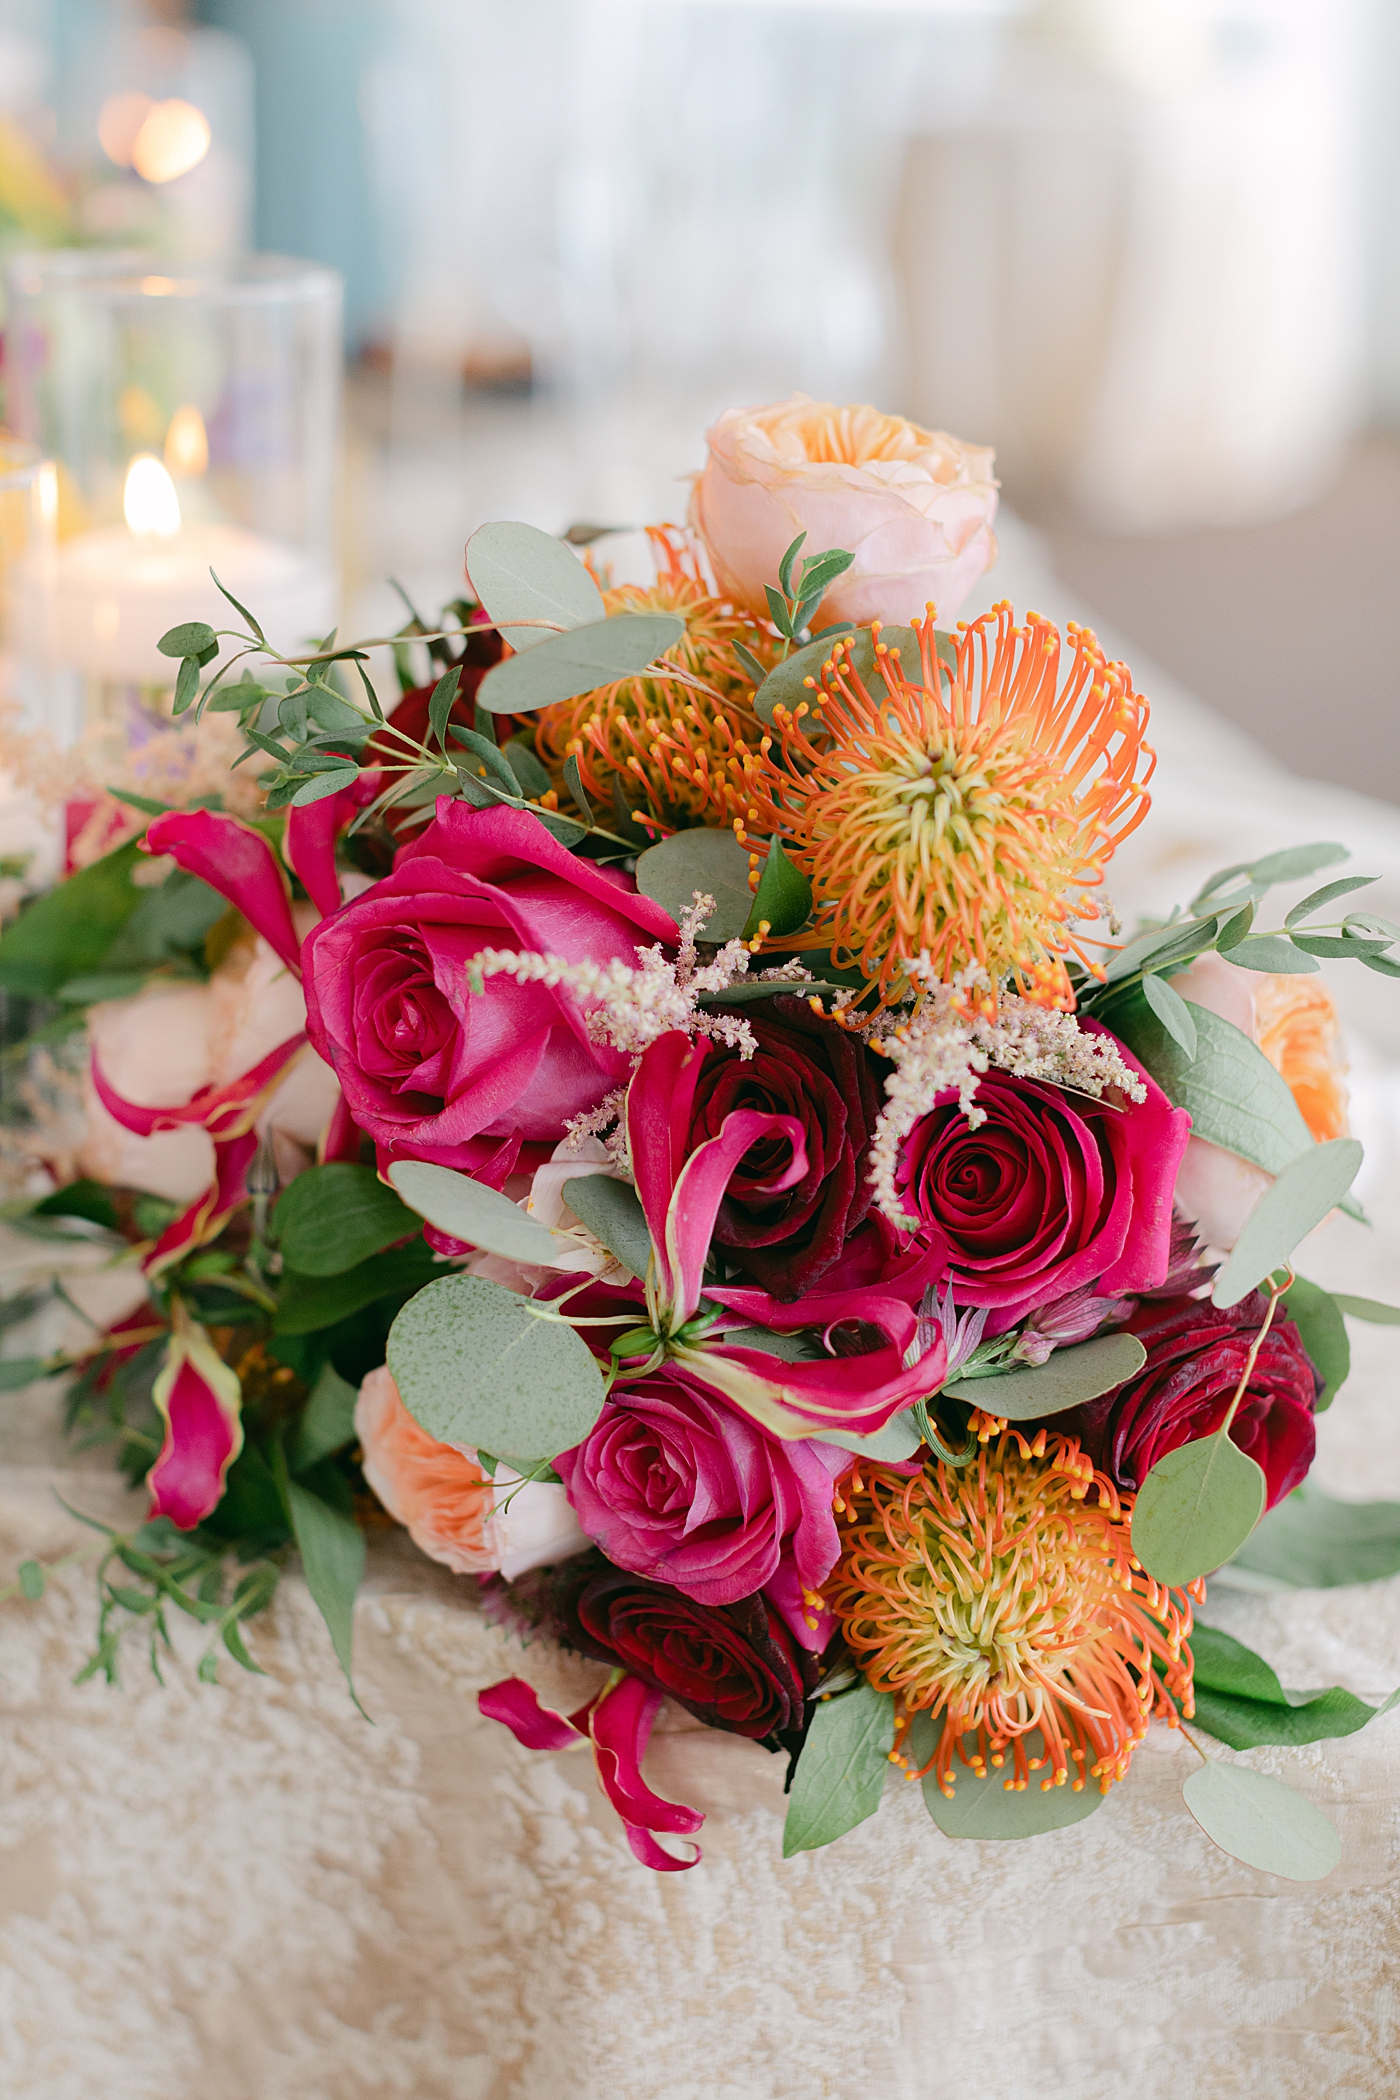 Reception floral details during Sagamore Wedding | Image by Hope Helmuth Photography